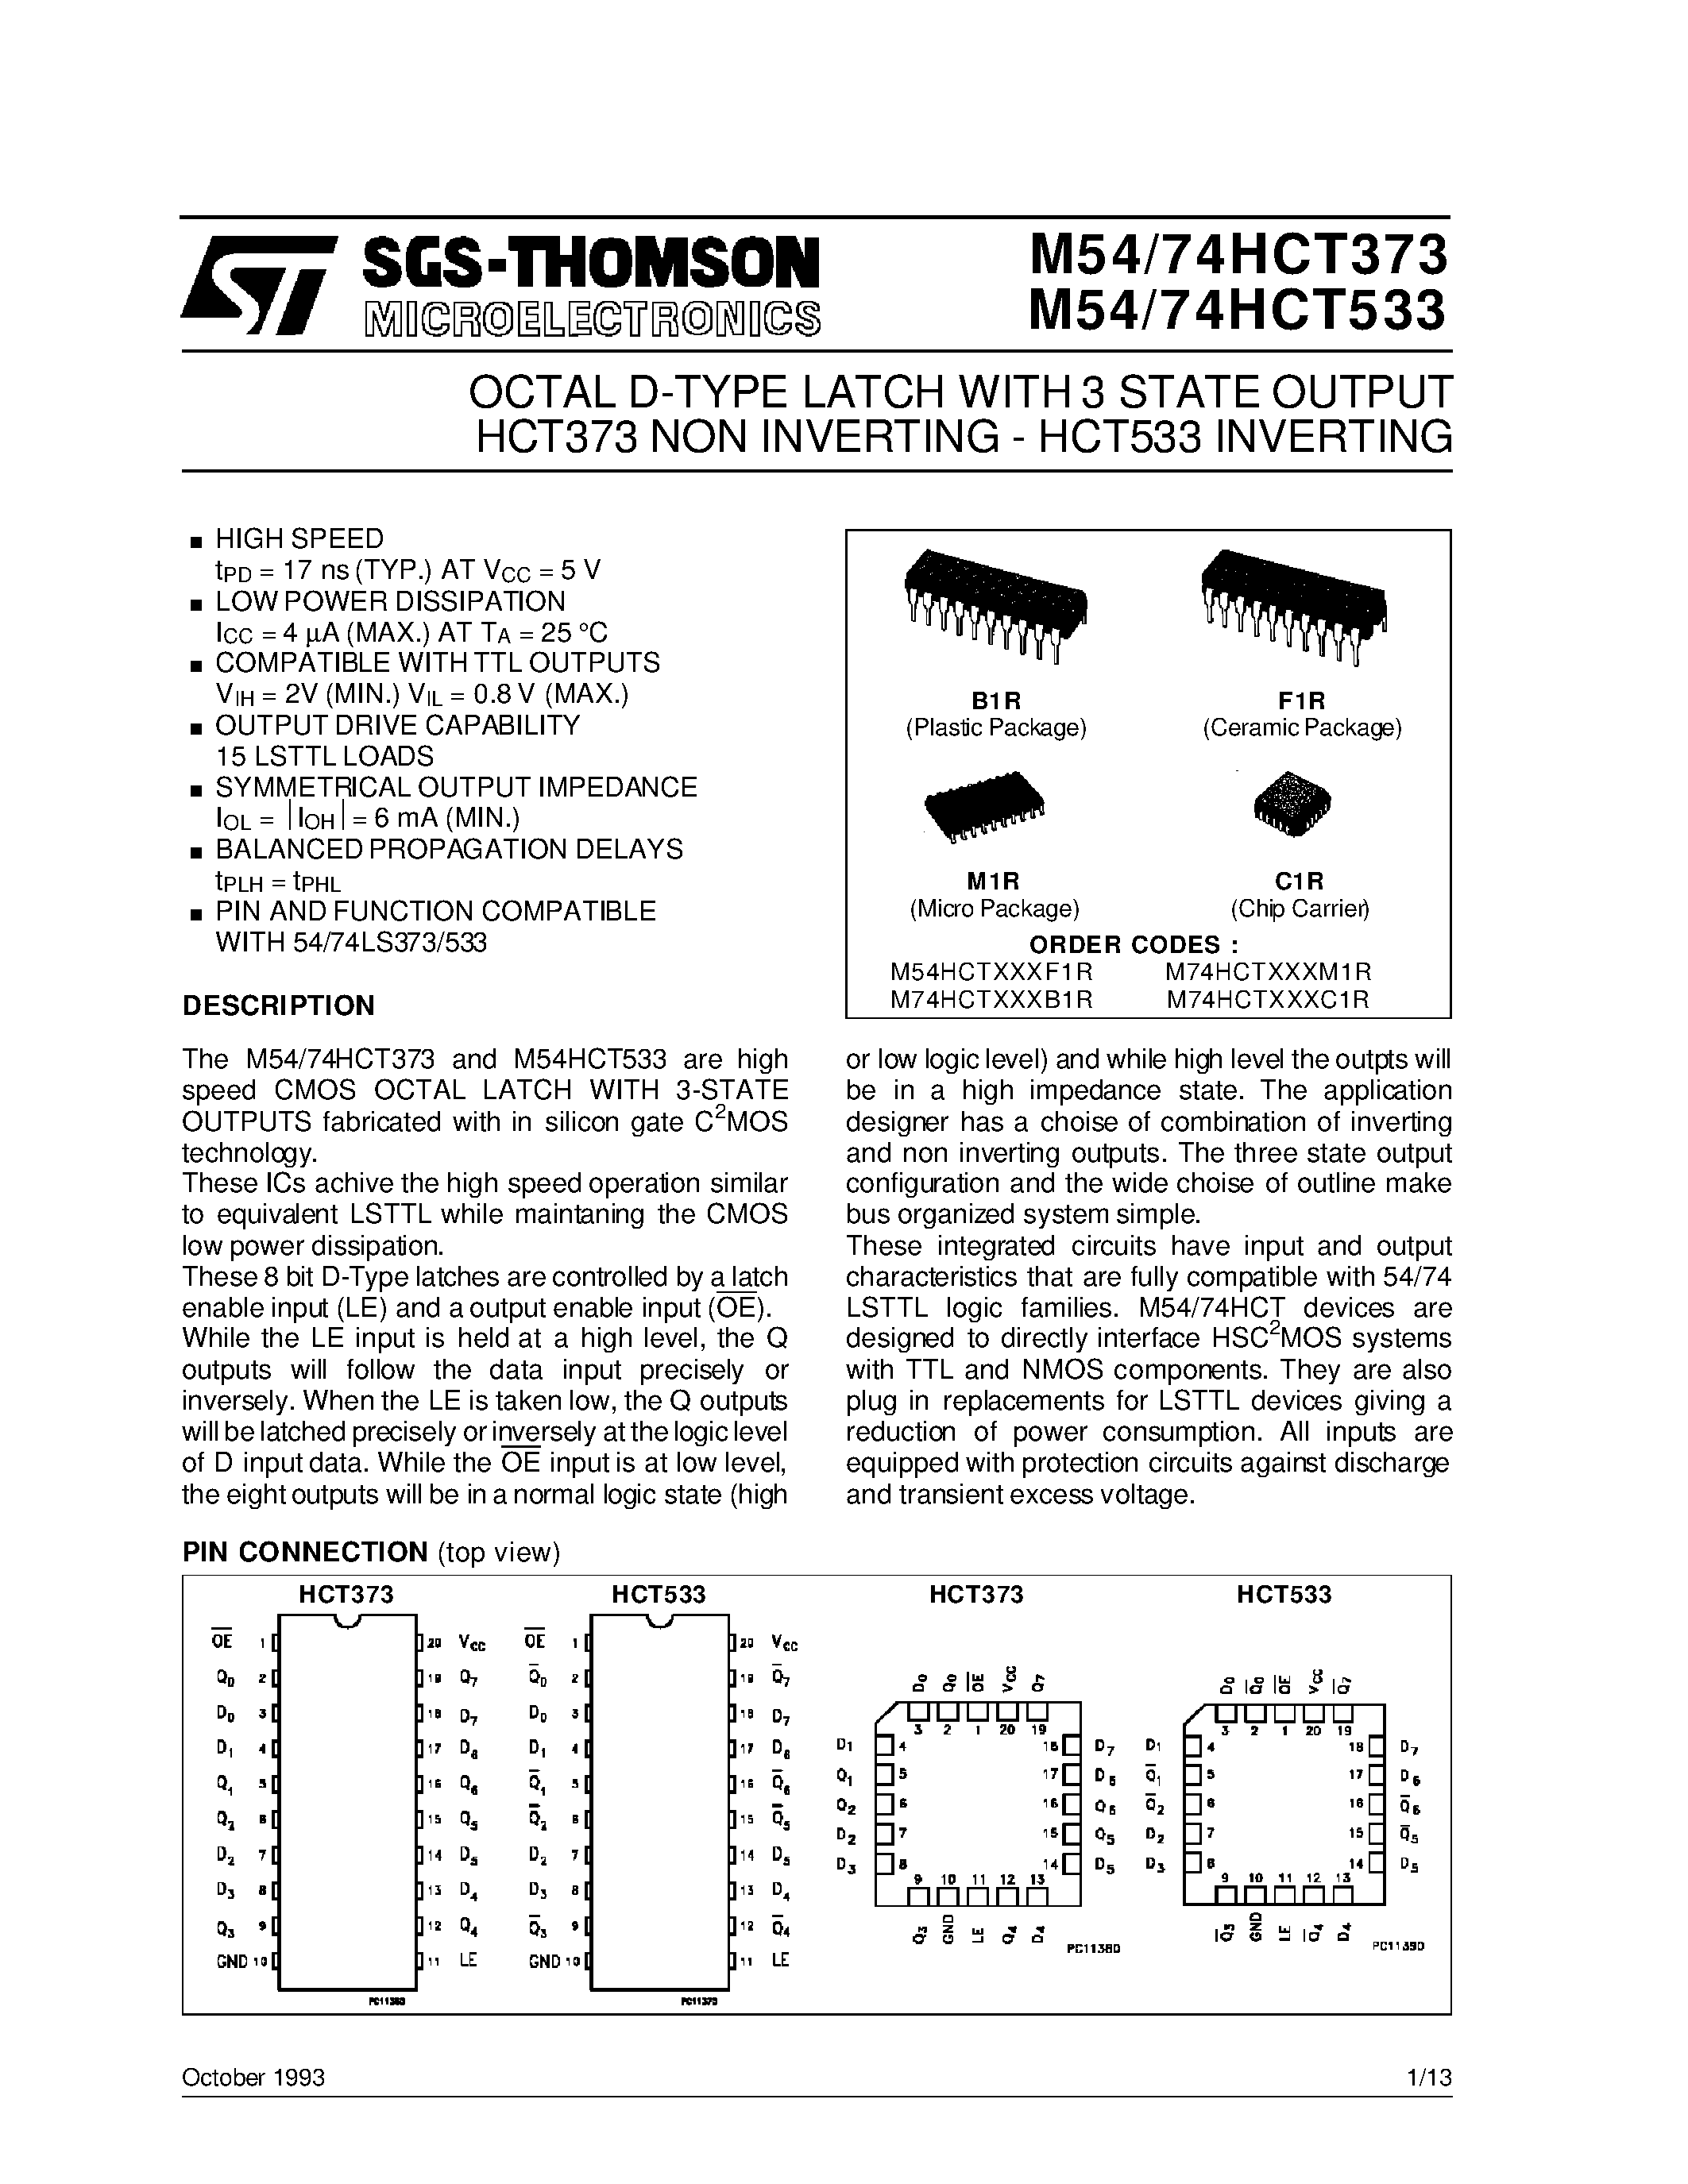 Datasheet M74HCT373 - OCTAL D-TYPE LATCH WITH 3 STATE OUTPUT HCT373 NON INVERTING - HCT533 INVERTING page 1